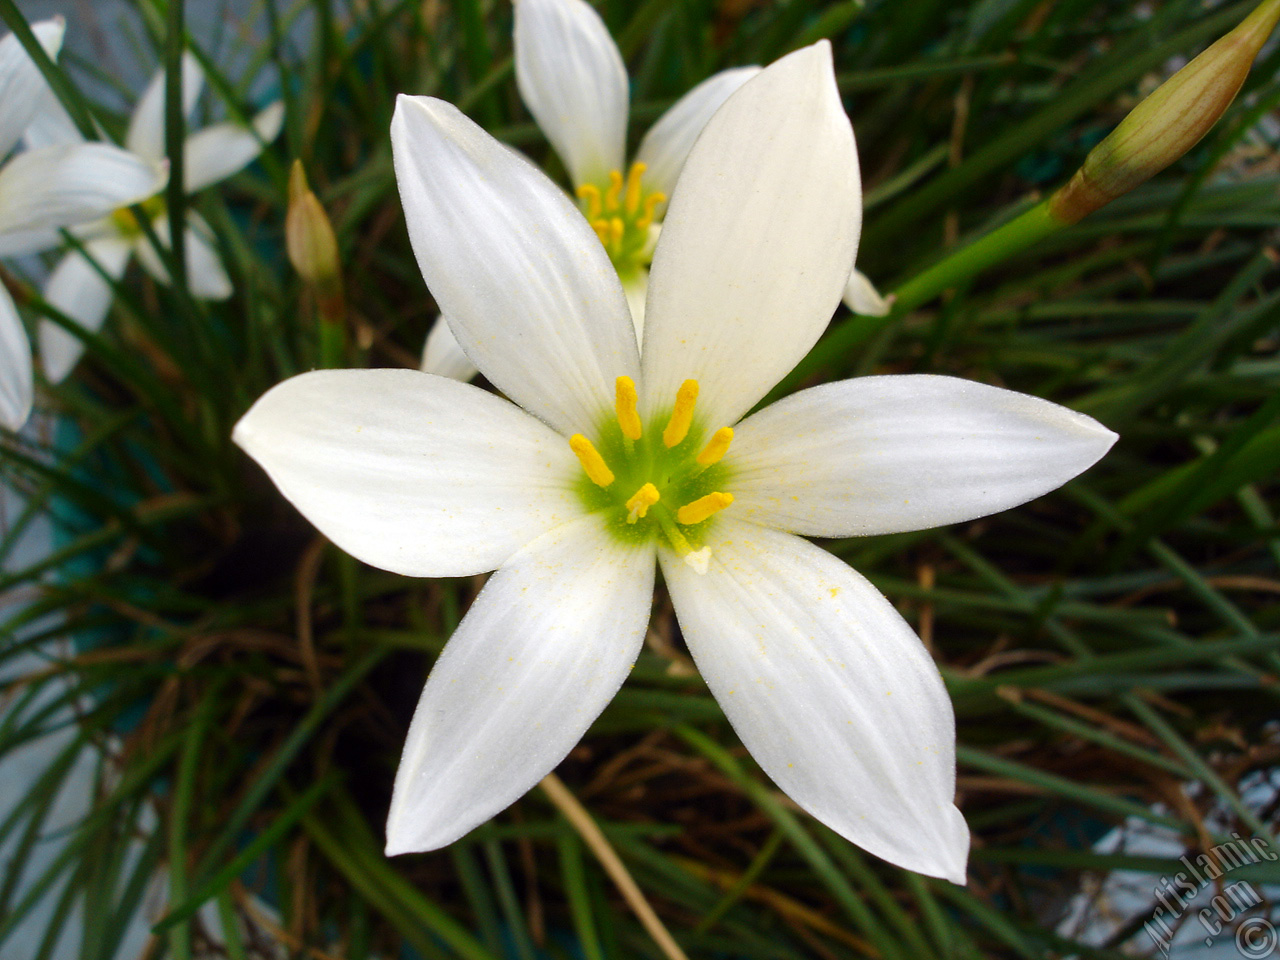 White color flower similar to lily.
